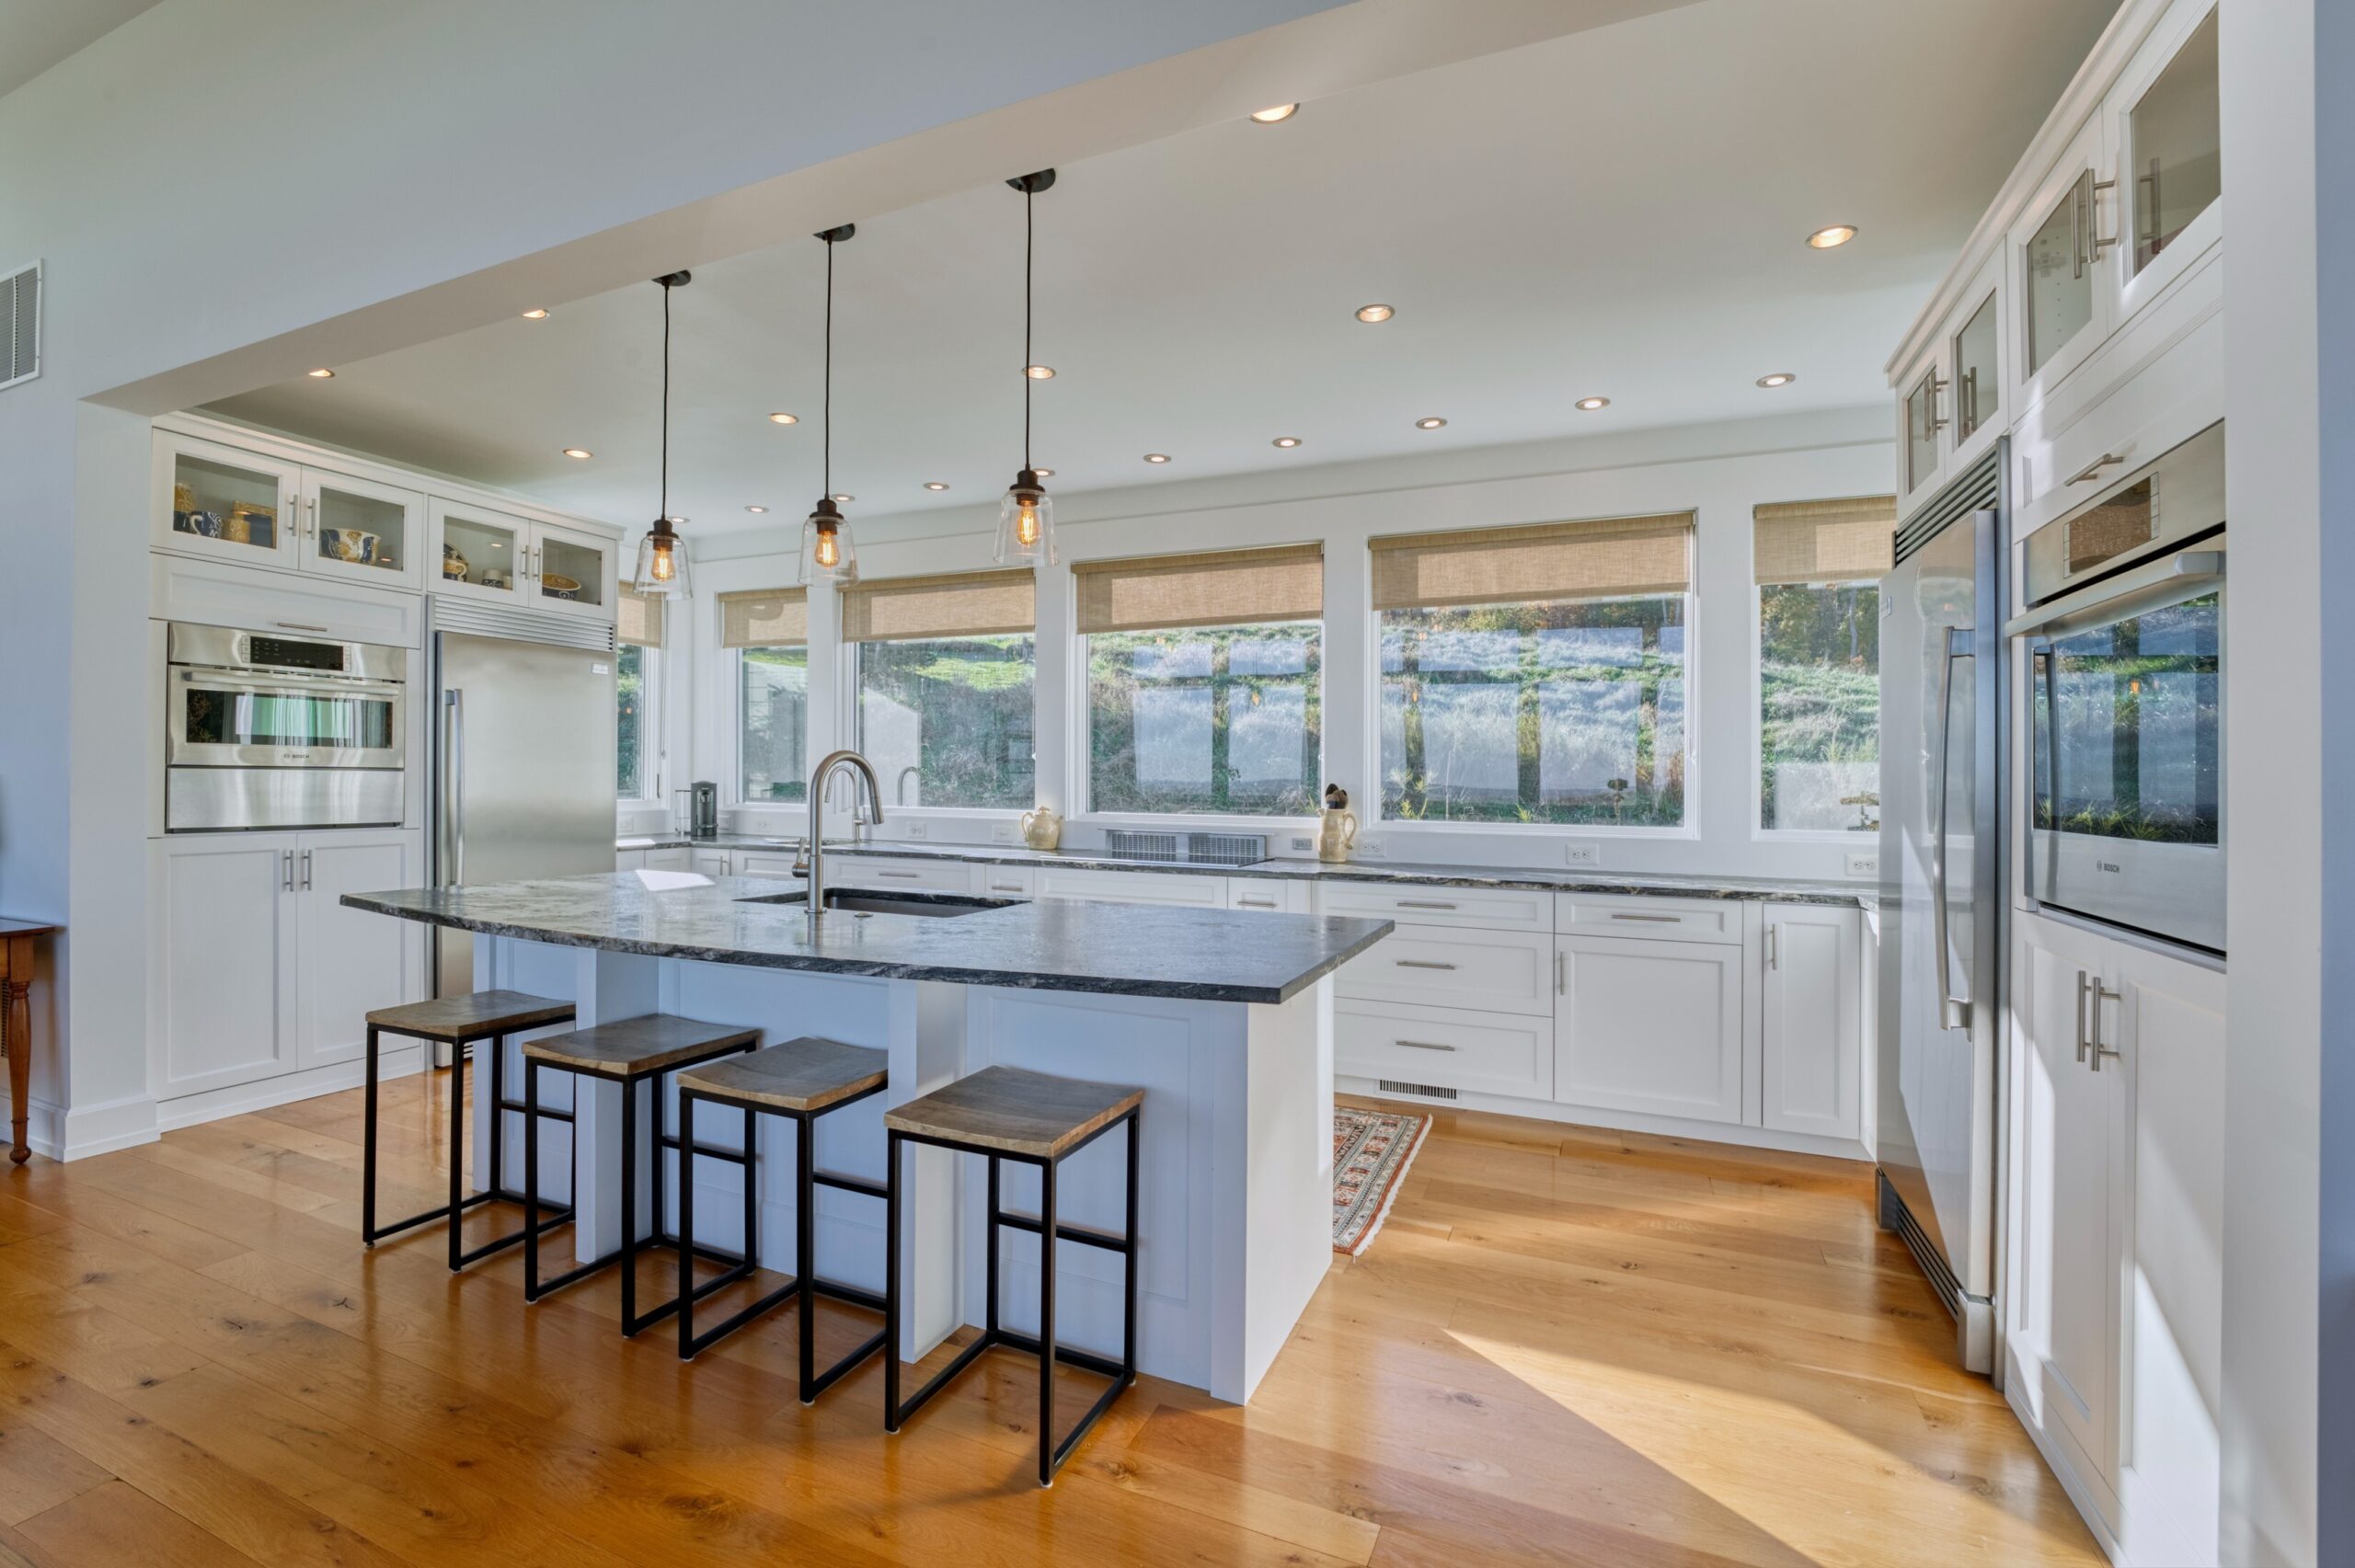 Professional interior photo of 17151 Brookdale Ln in Round Hill, VA - showing the kitchen with stone countertops, high-end stainless appliances, large island with bar and barstools and inset farmers sink